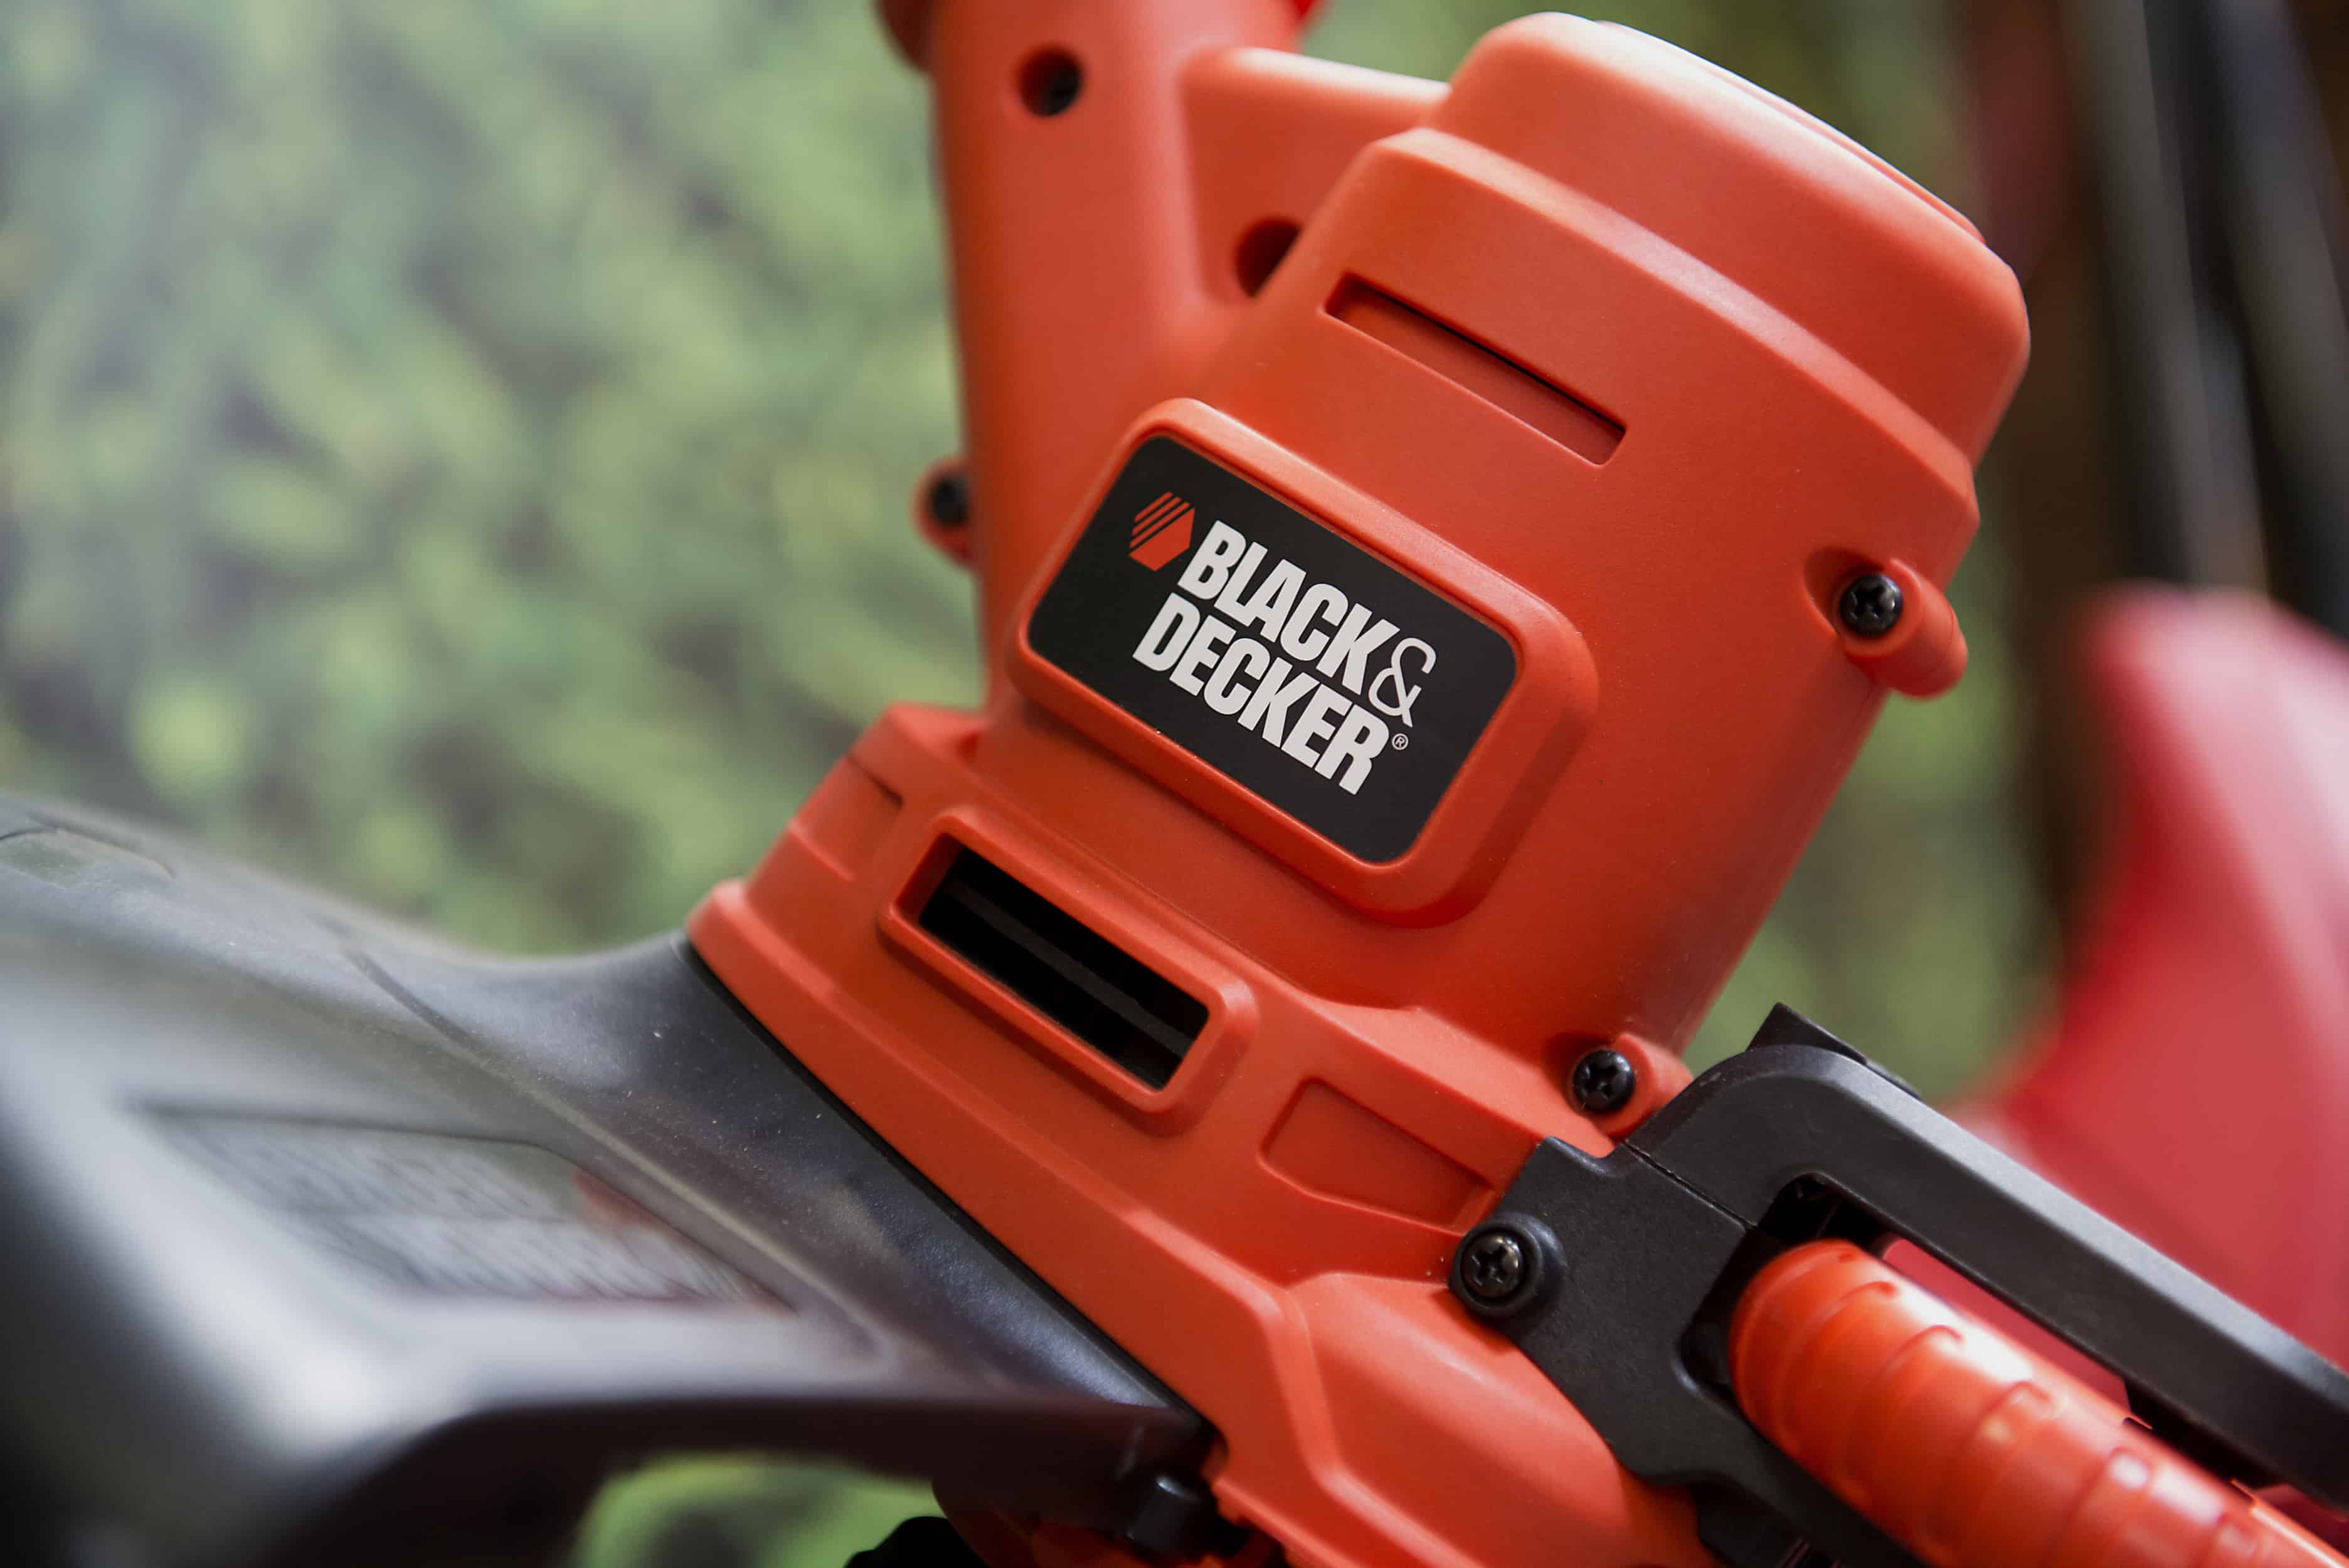 Stanley Black & Decker adds tractors and snow blowers